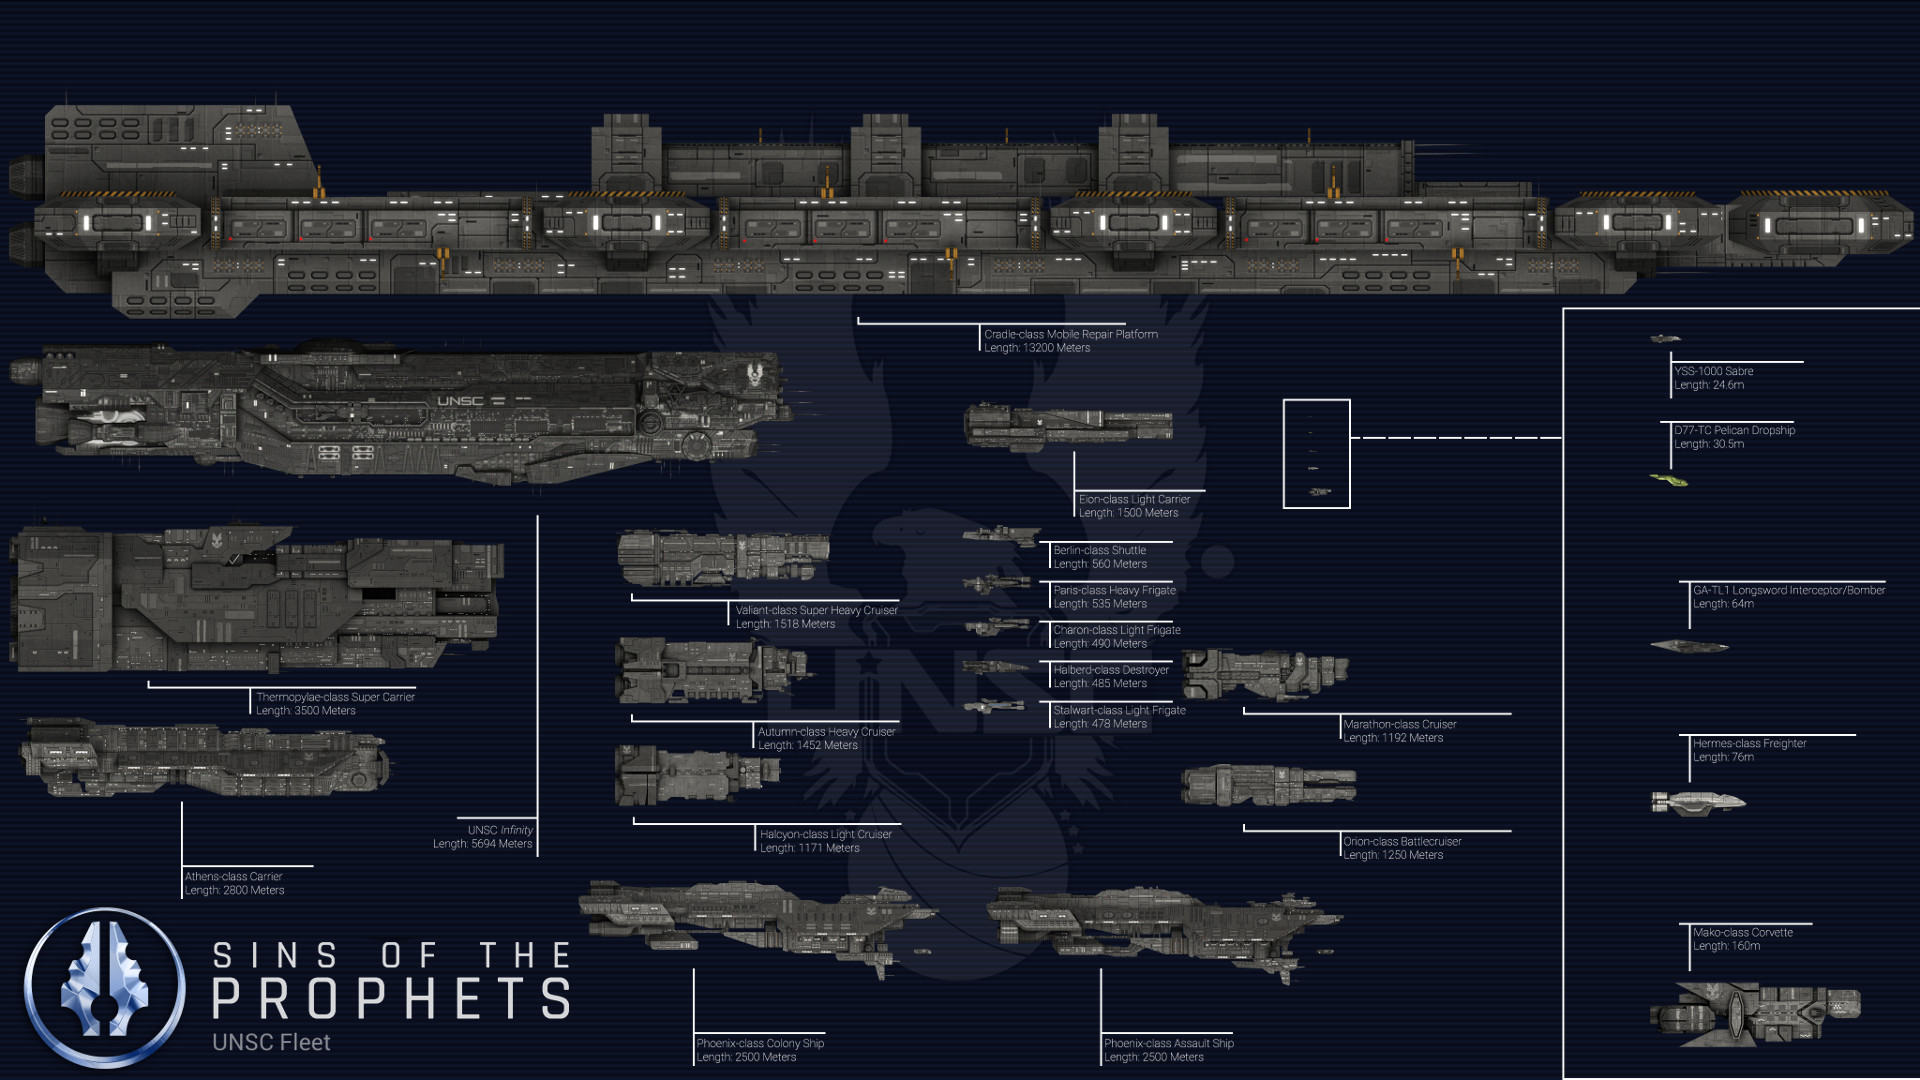 1920x1080 UNSC Fleet Scale image - Sins of the Prophets mod for Sins of a Solar Empire